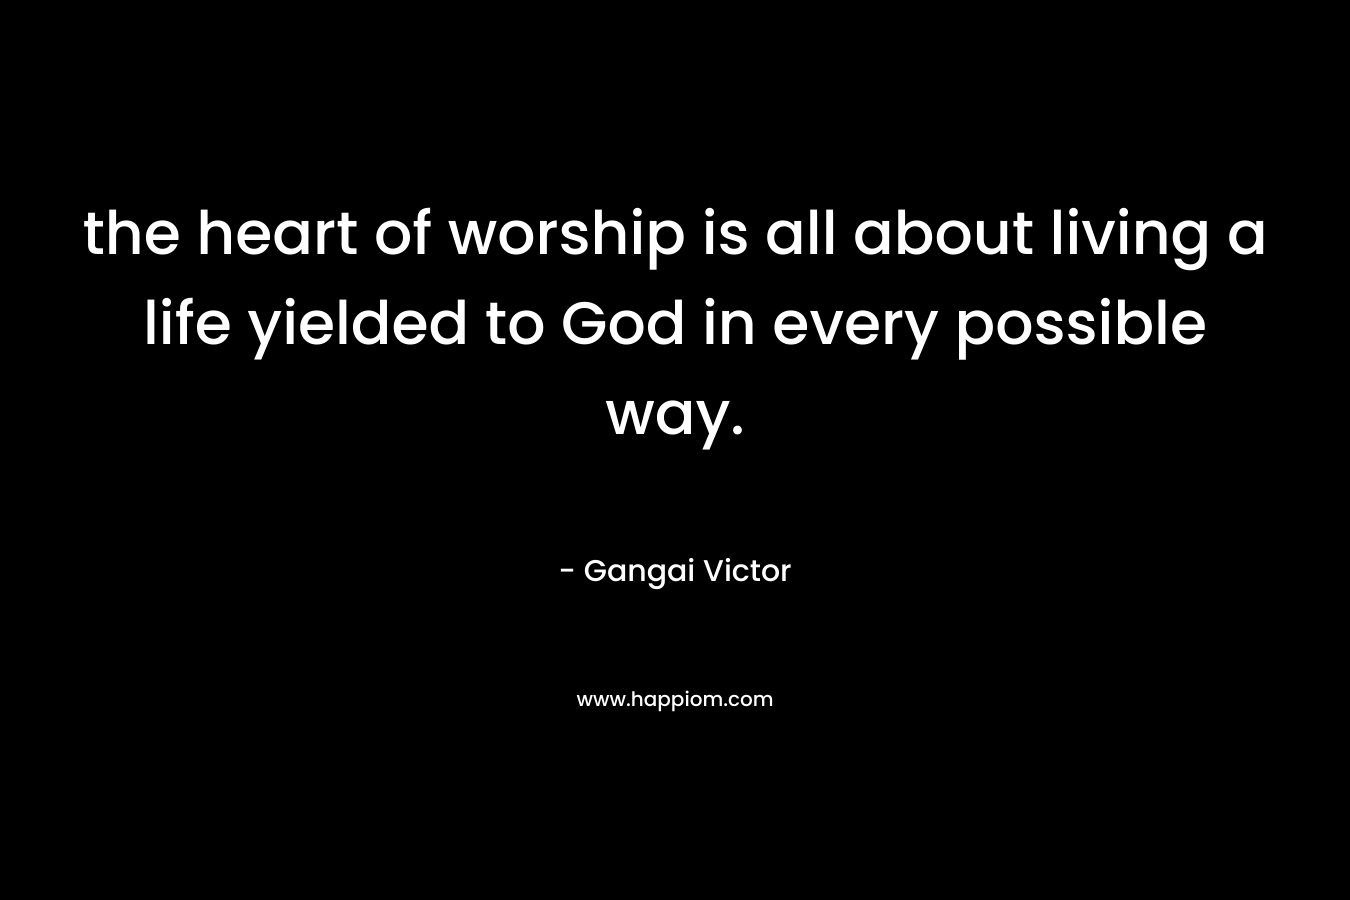 the heart of worship is all about living a life yielded to God in every possible way.